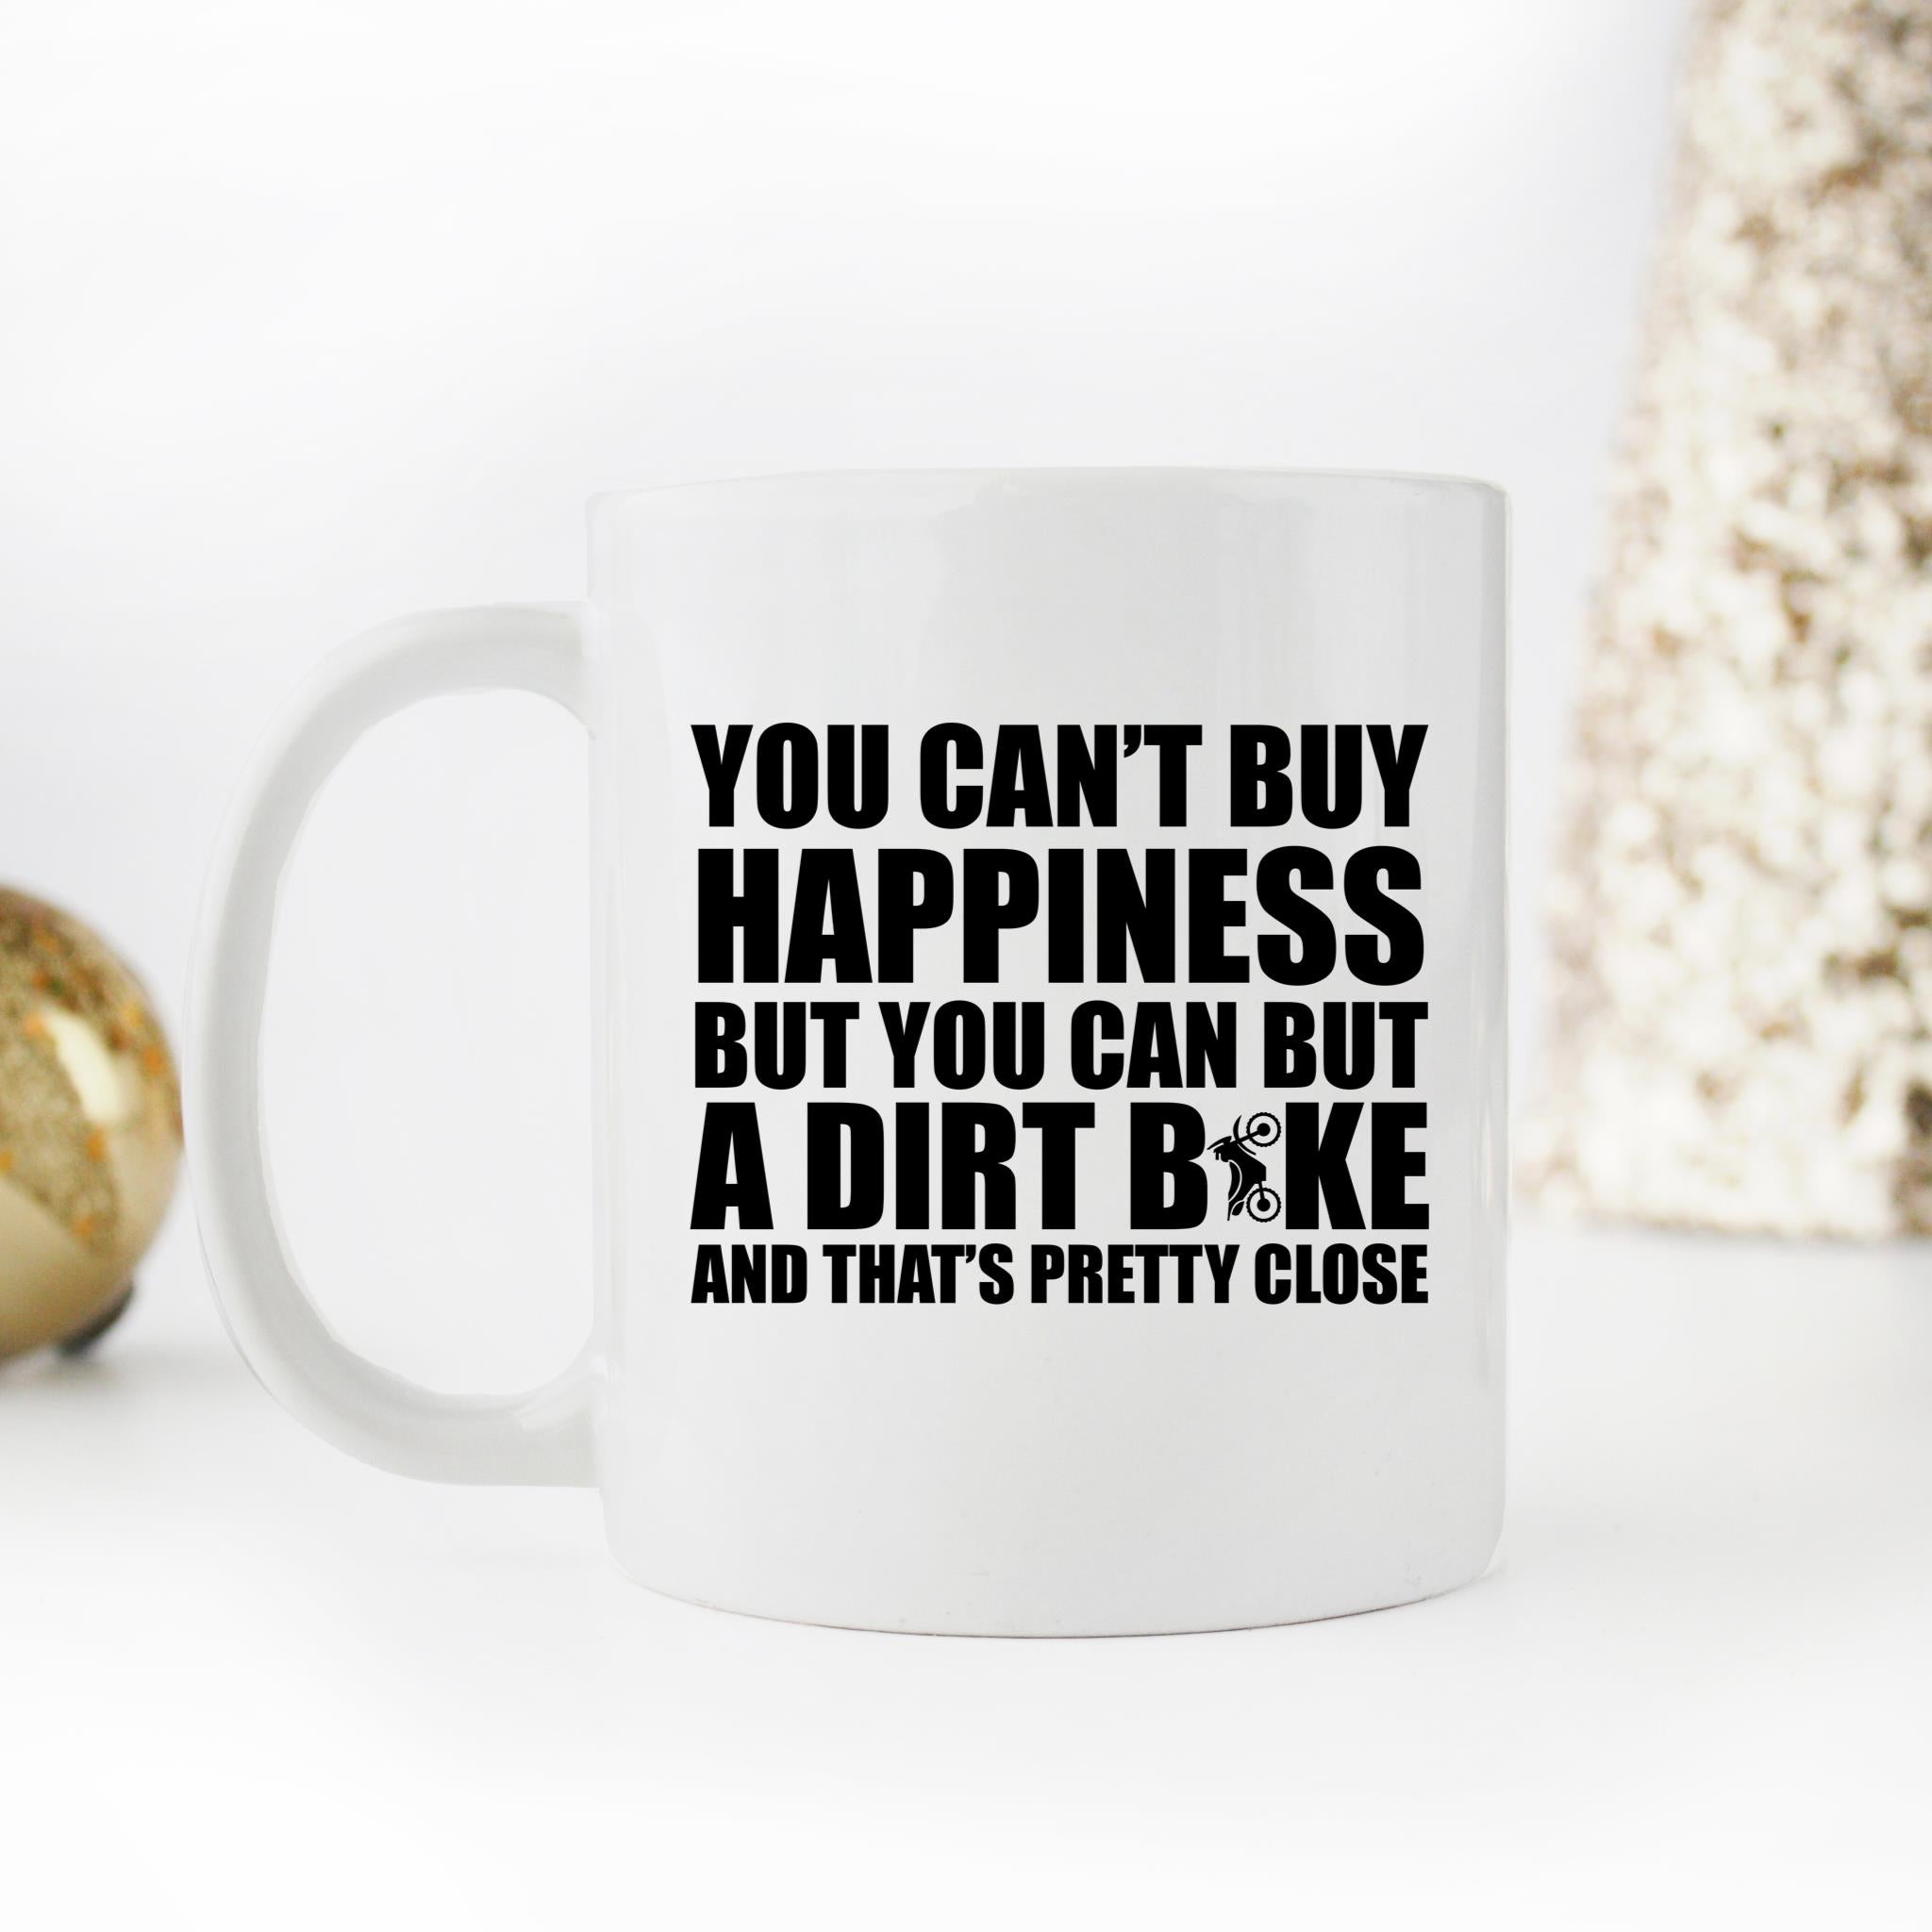 Skitongifts Funny Ceramic Novelty Coffee Mug Dirtbike Happy Great For Any Motorcycle Fan Lover uSTZyDt